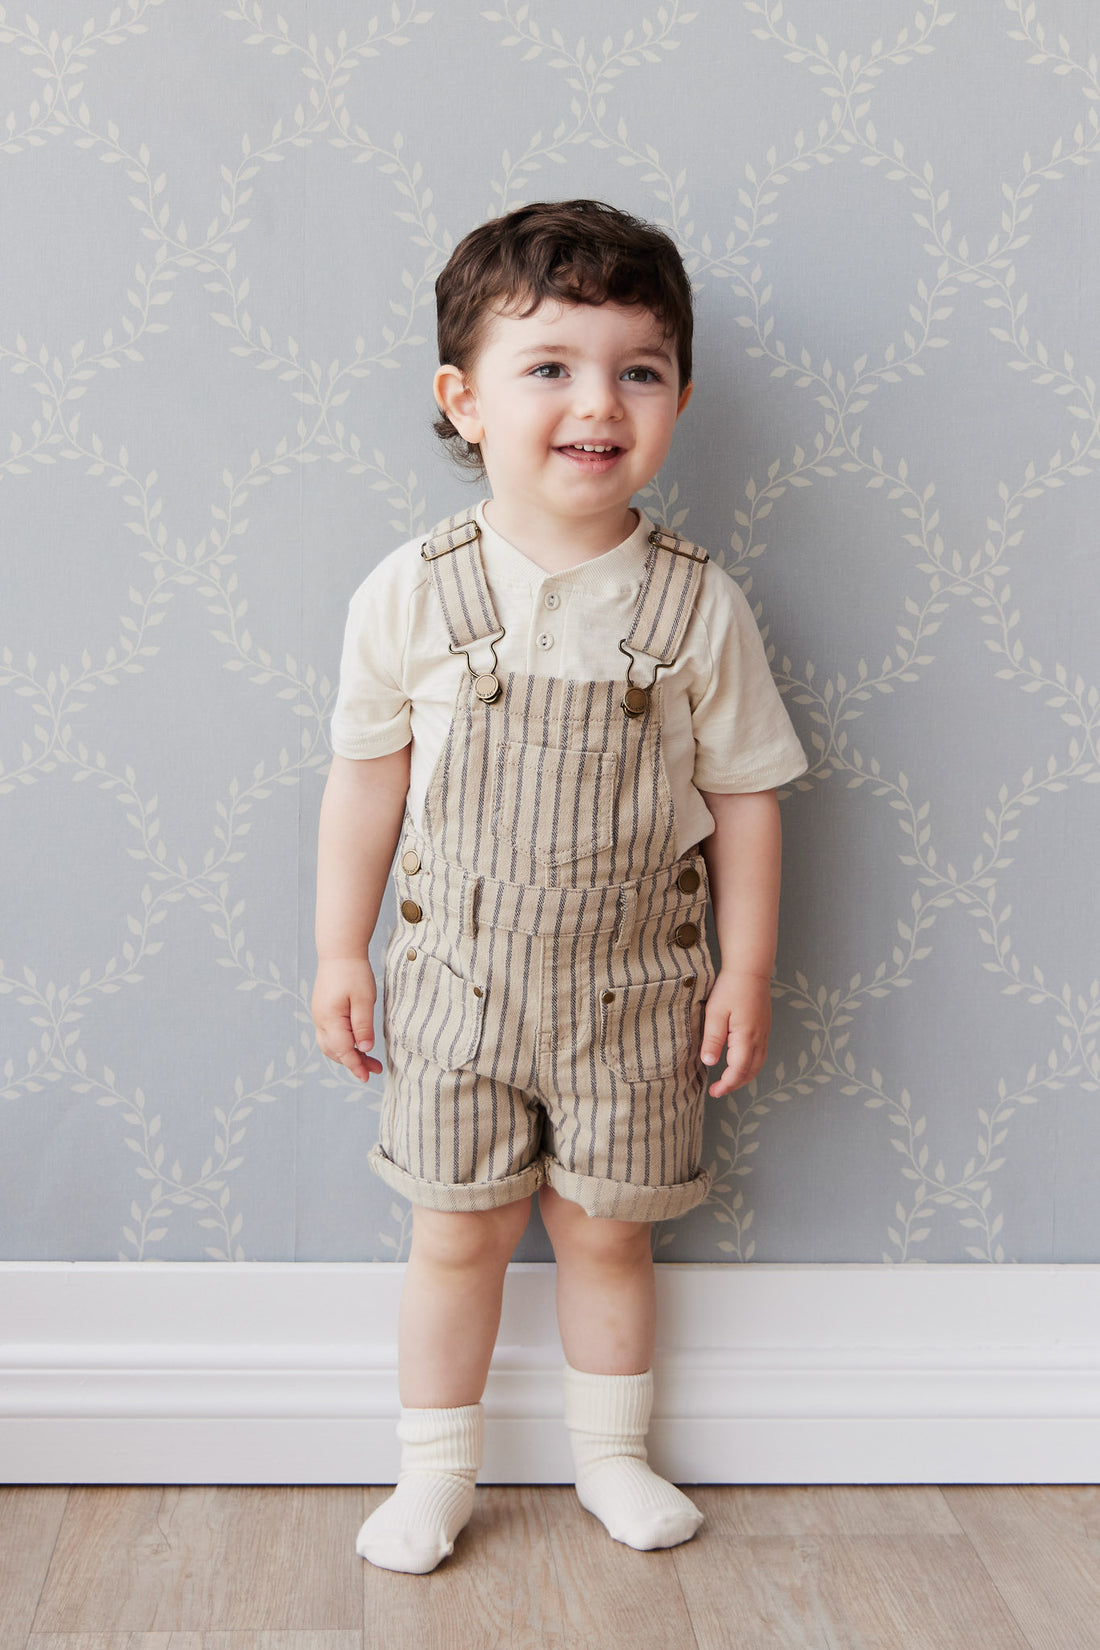 Chase Short Overall - Cashew/Moonstone Childrens Overall from Jamie Kay NZ